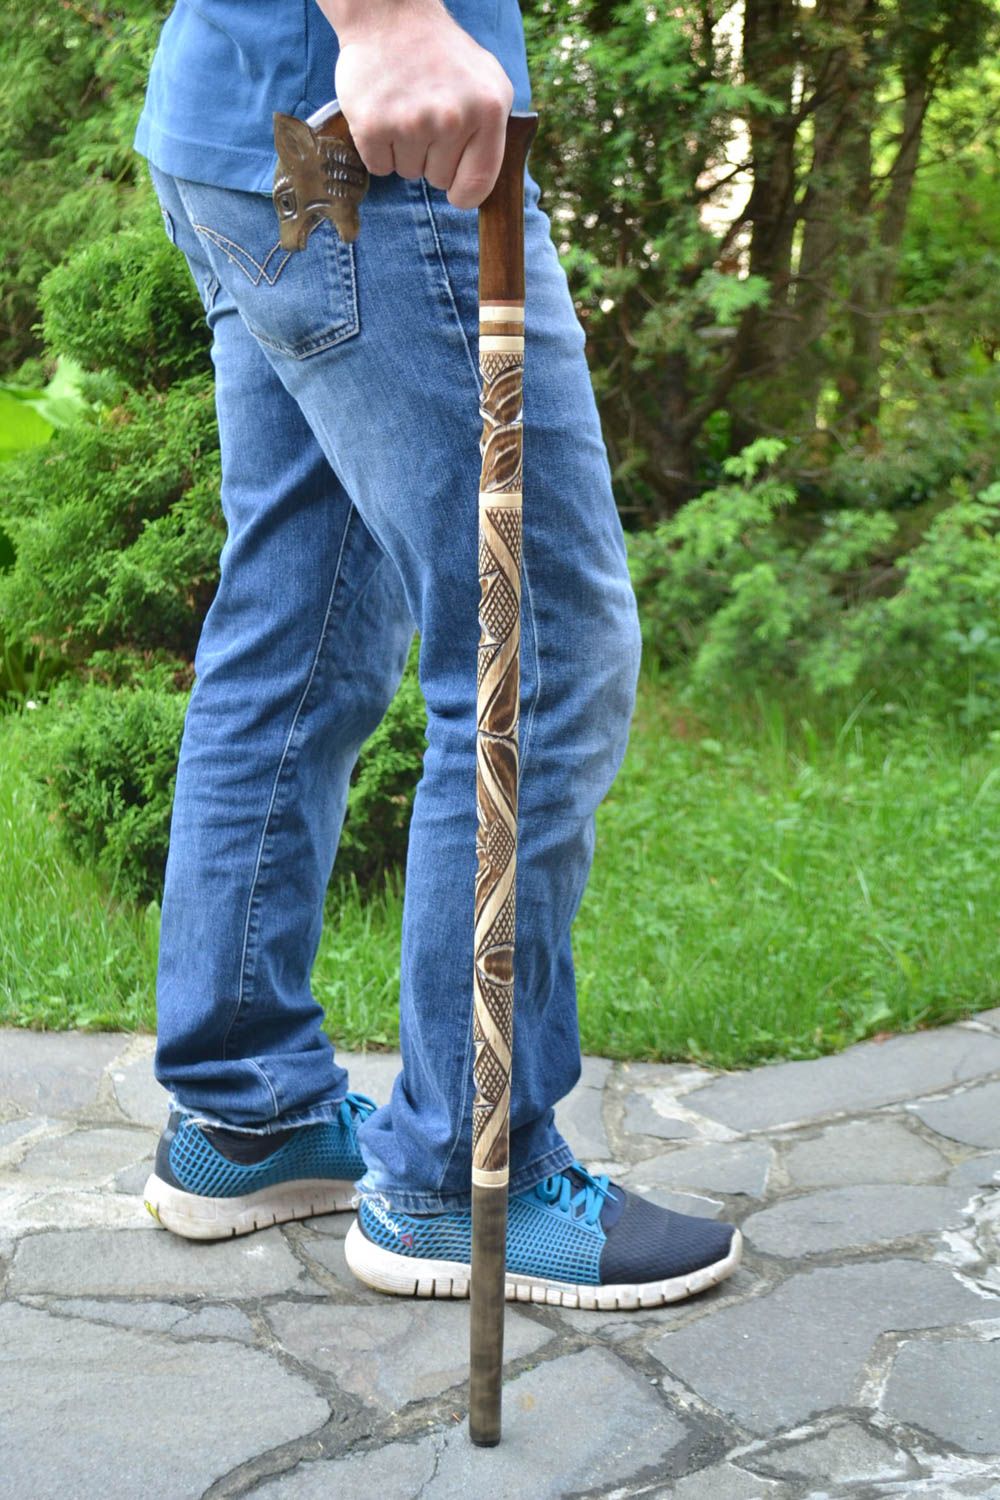 Animal Head & Handcrafted Walking Canes